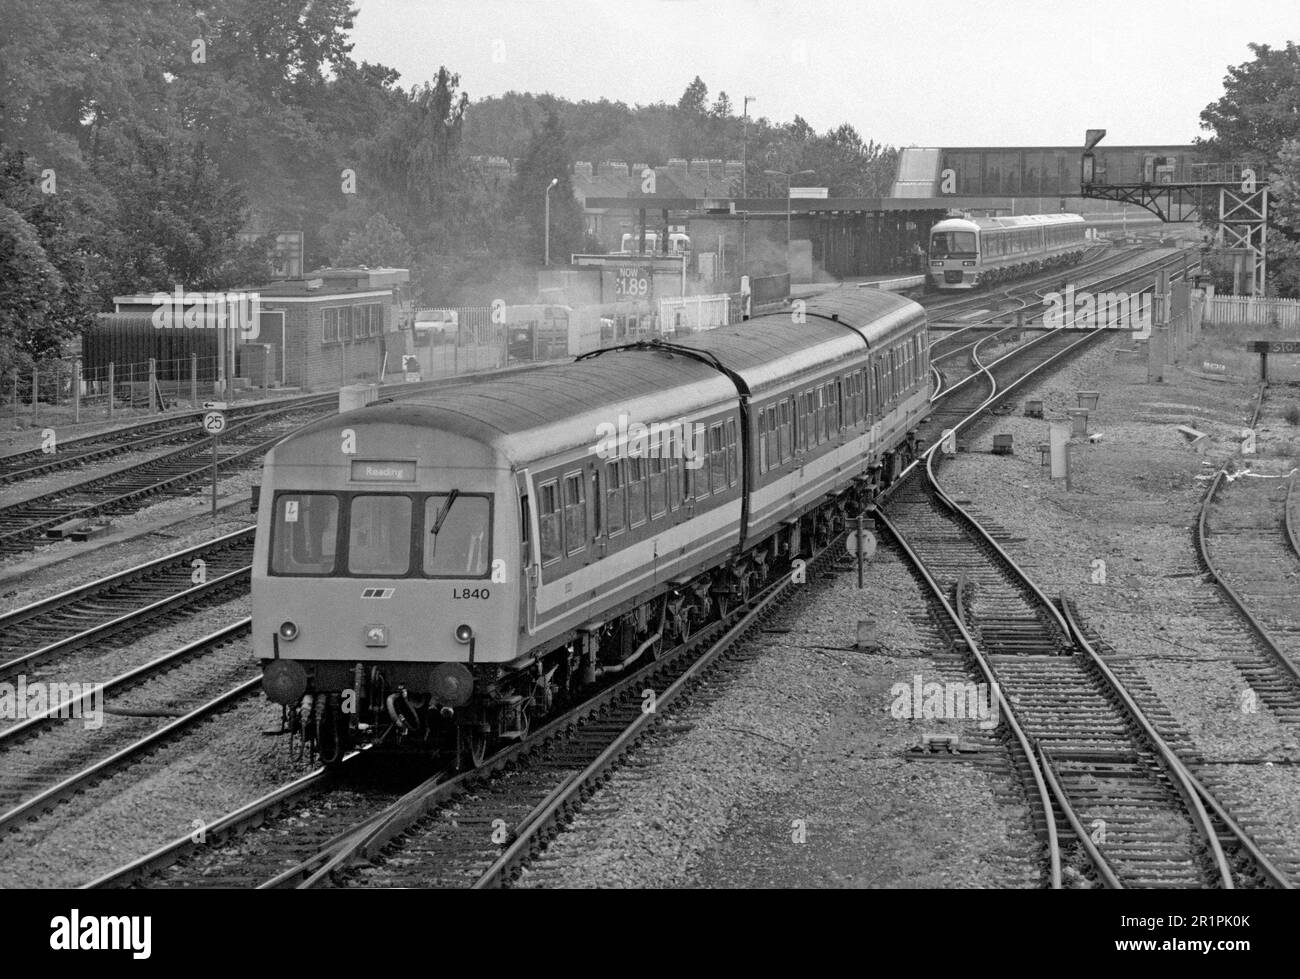 A Class 101 diesel multiple unit set number L840 formed of vehicles 53311 & 53322 departs from Oxford with a Network South East service. The new order of Class 165 DMUs which would replace them can be seen in the background. Oxford. 20th June 1992. Stock Photo